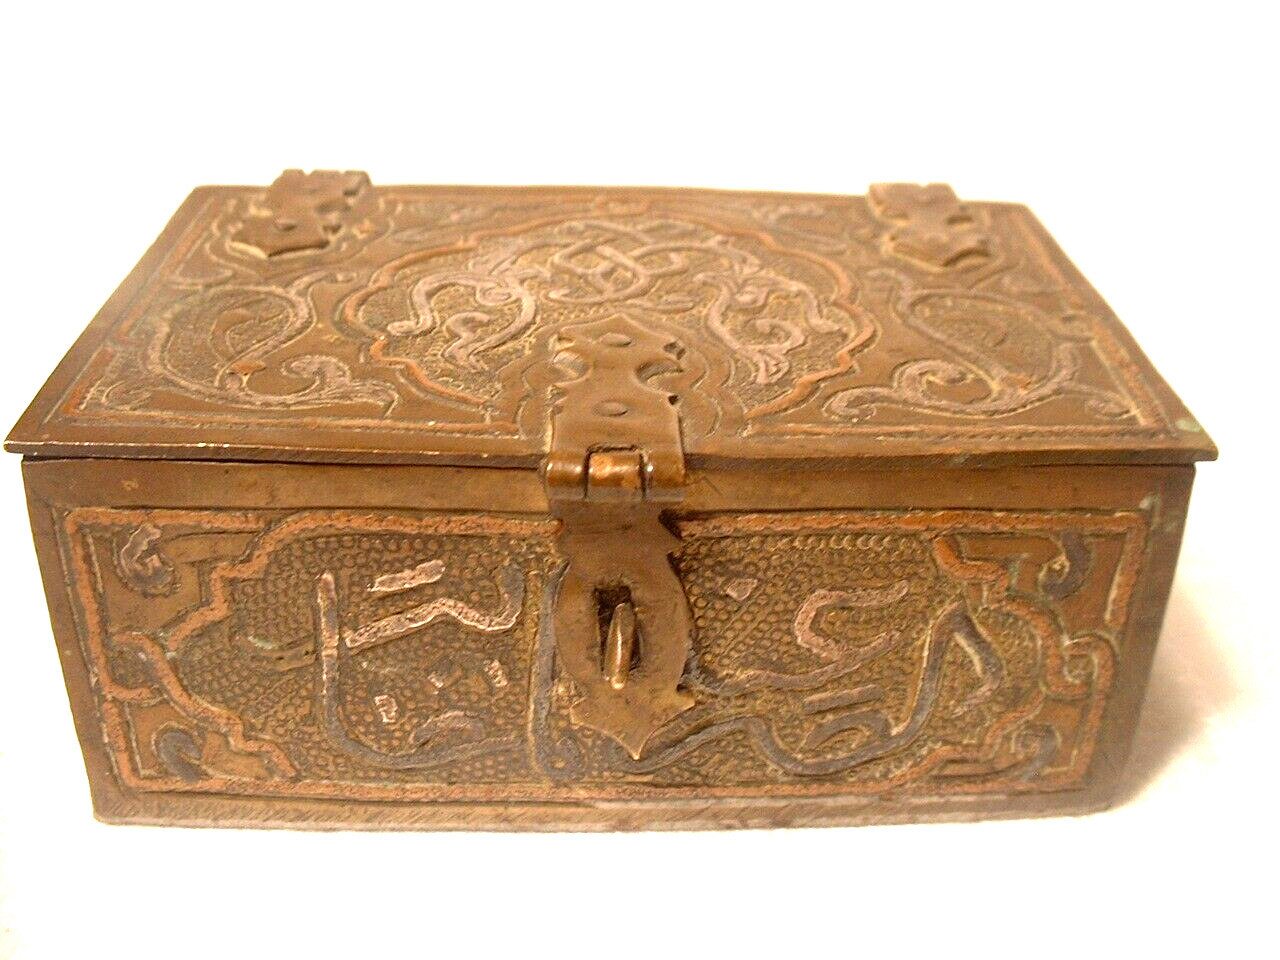 Lovely Antique Arabic Mid-Eastern Bronze Box with Silver Inlay